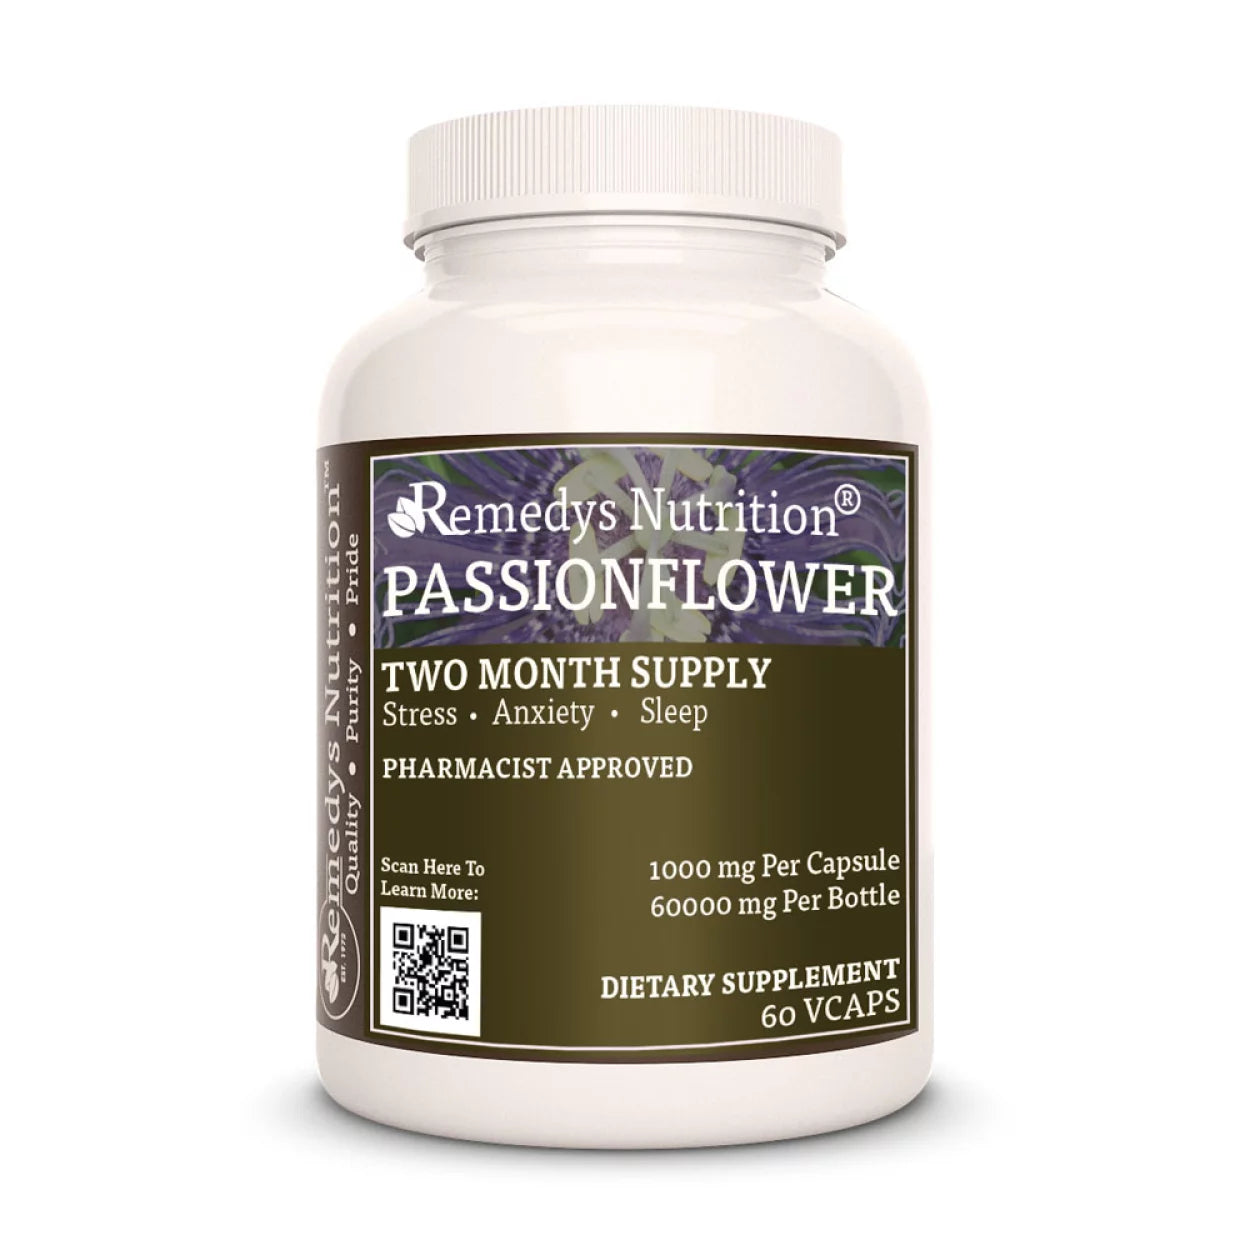 Image of Remedy's Nutrition® Passionflower Capsules Herbal Dietary Supplement front bottle. Made in USA. Passiflora incarnata.